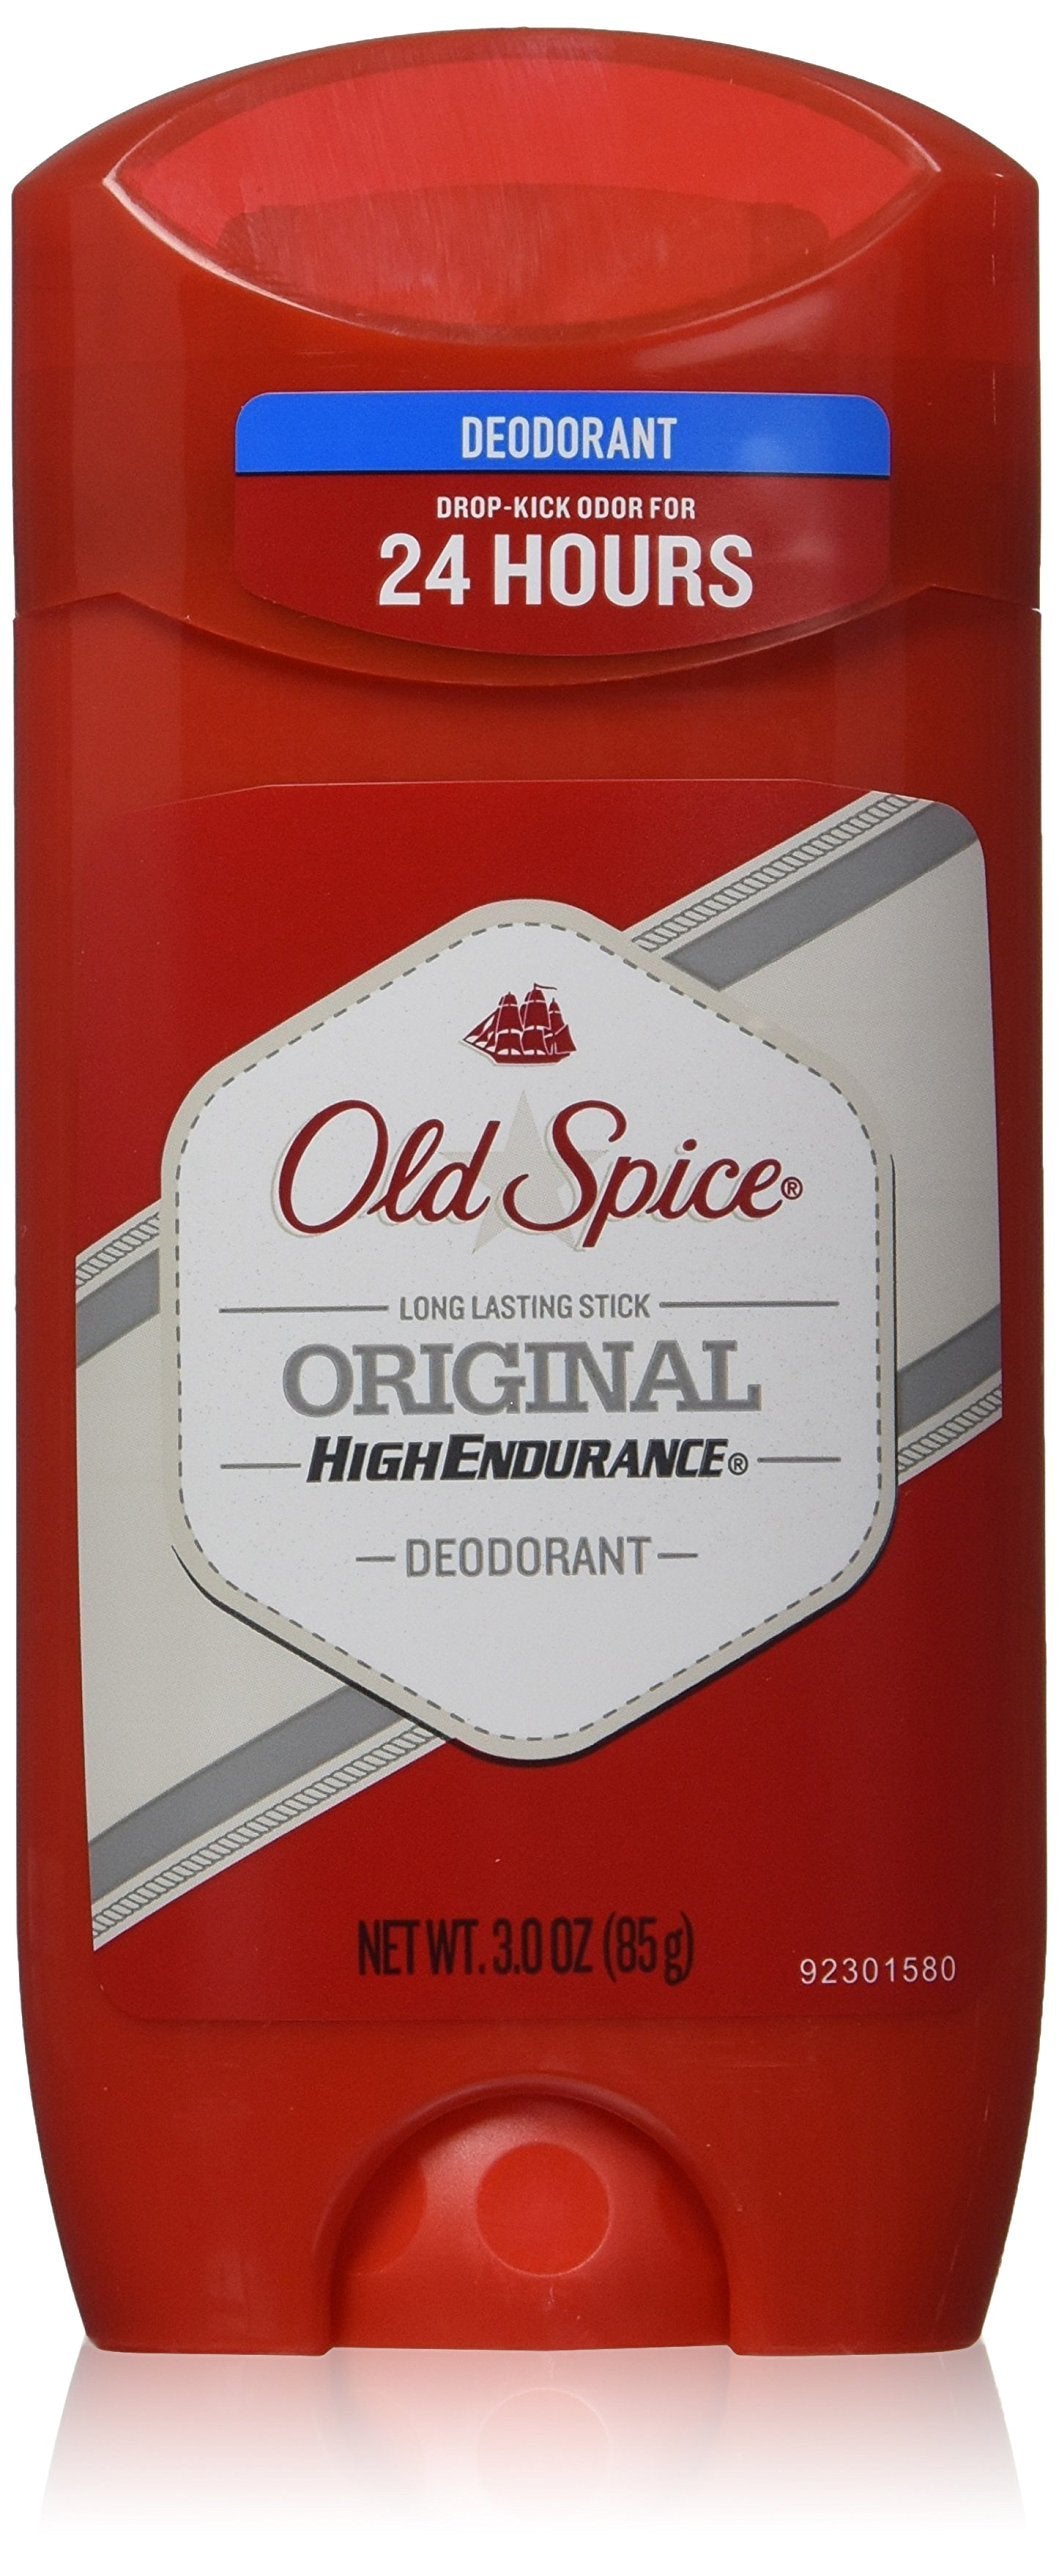 Old Spice High Endurance Original Scent Deodorant for Men - 3 Ounce / 85g, 3 Pack